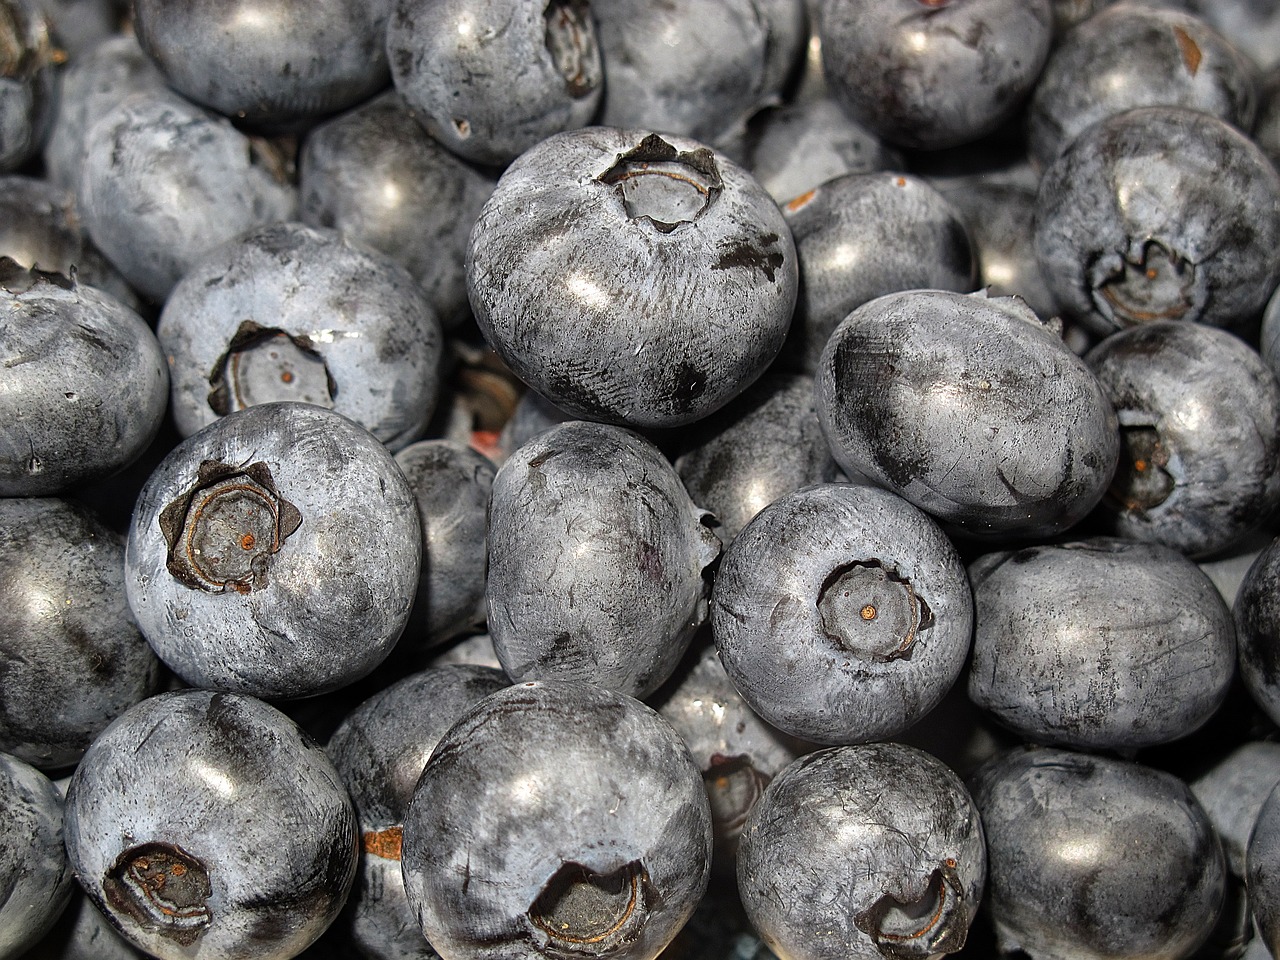 a close up of a bunch of blueberries, a photo, by Johannes Martini, photorealism, photorealism. trending on flickr, grey vegetables, grain”